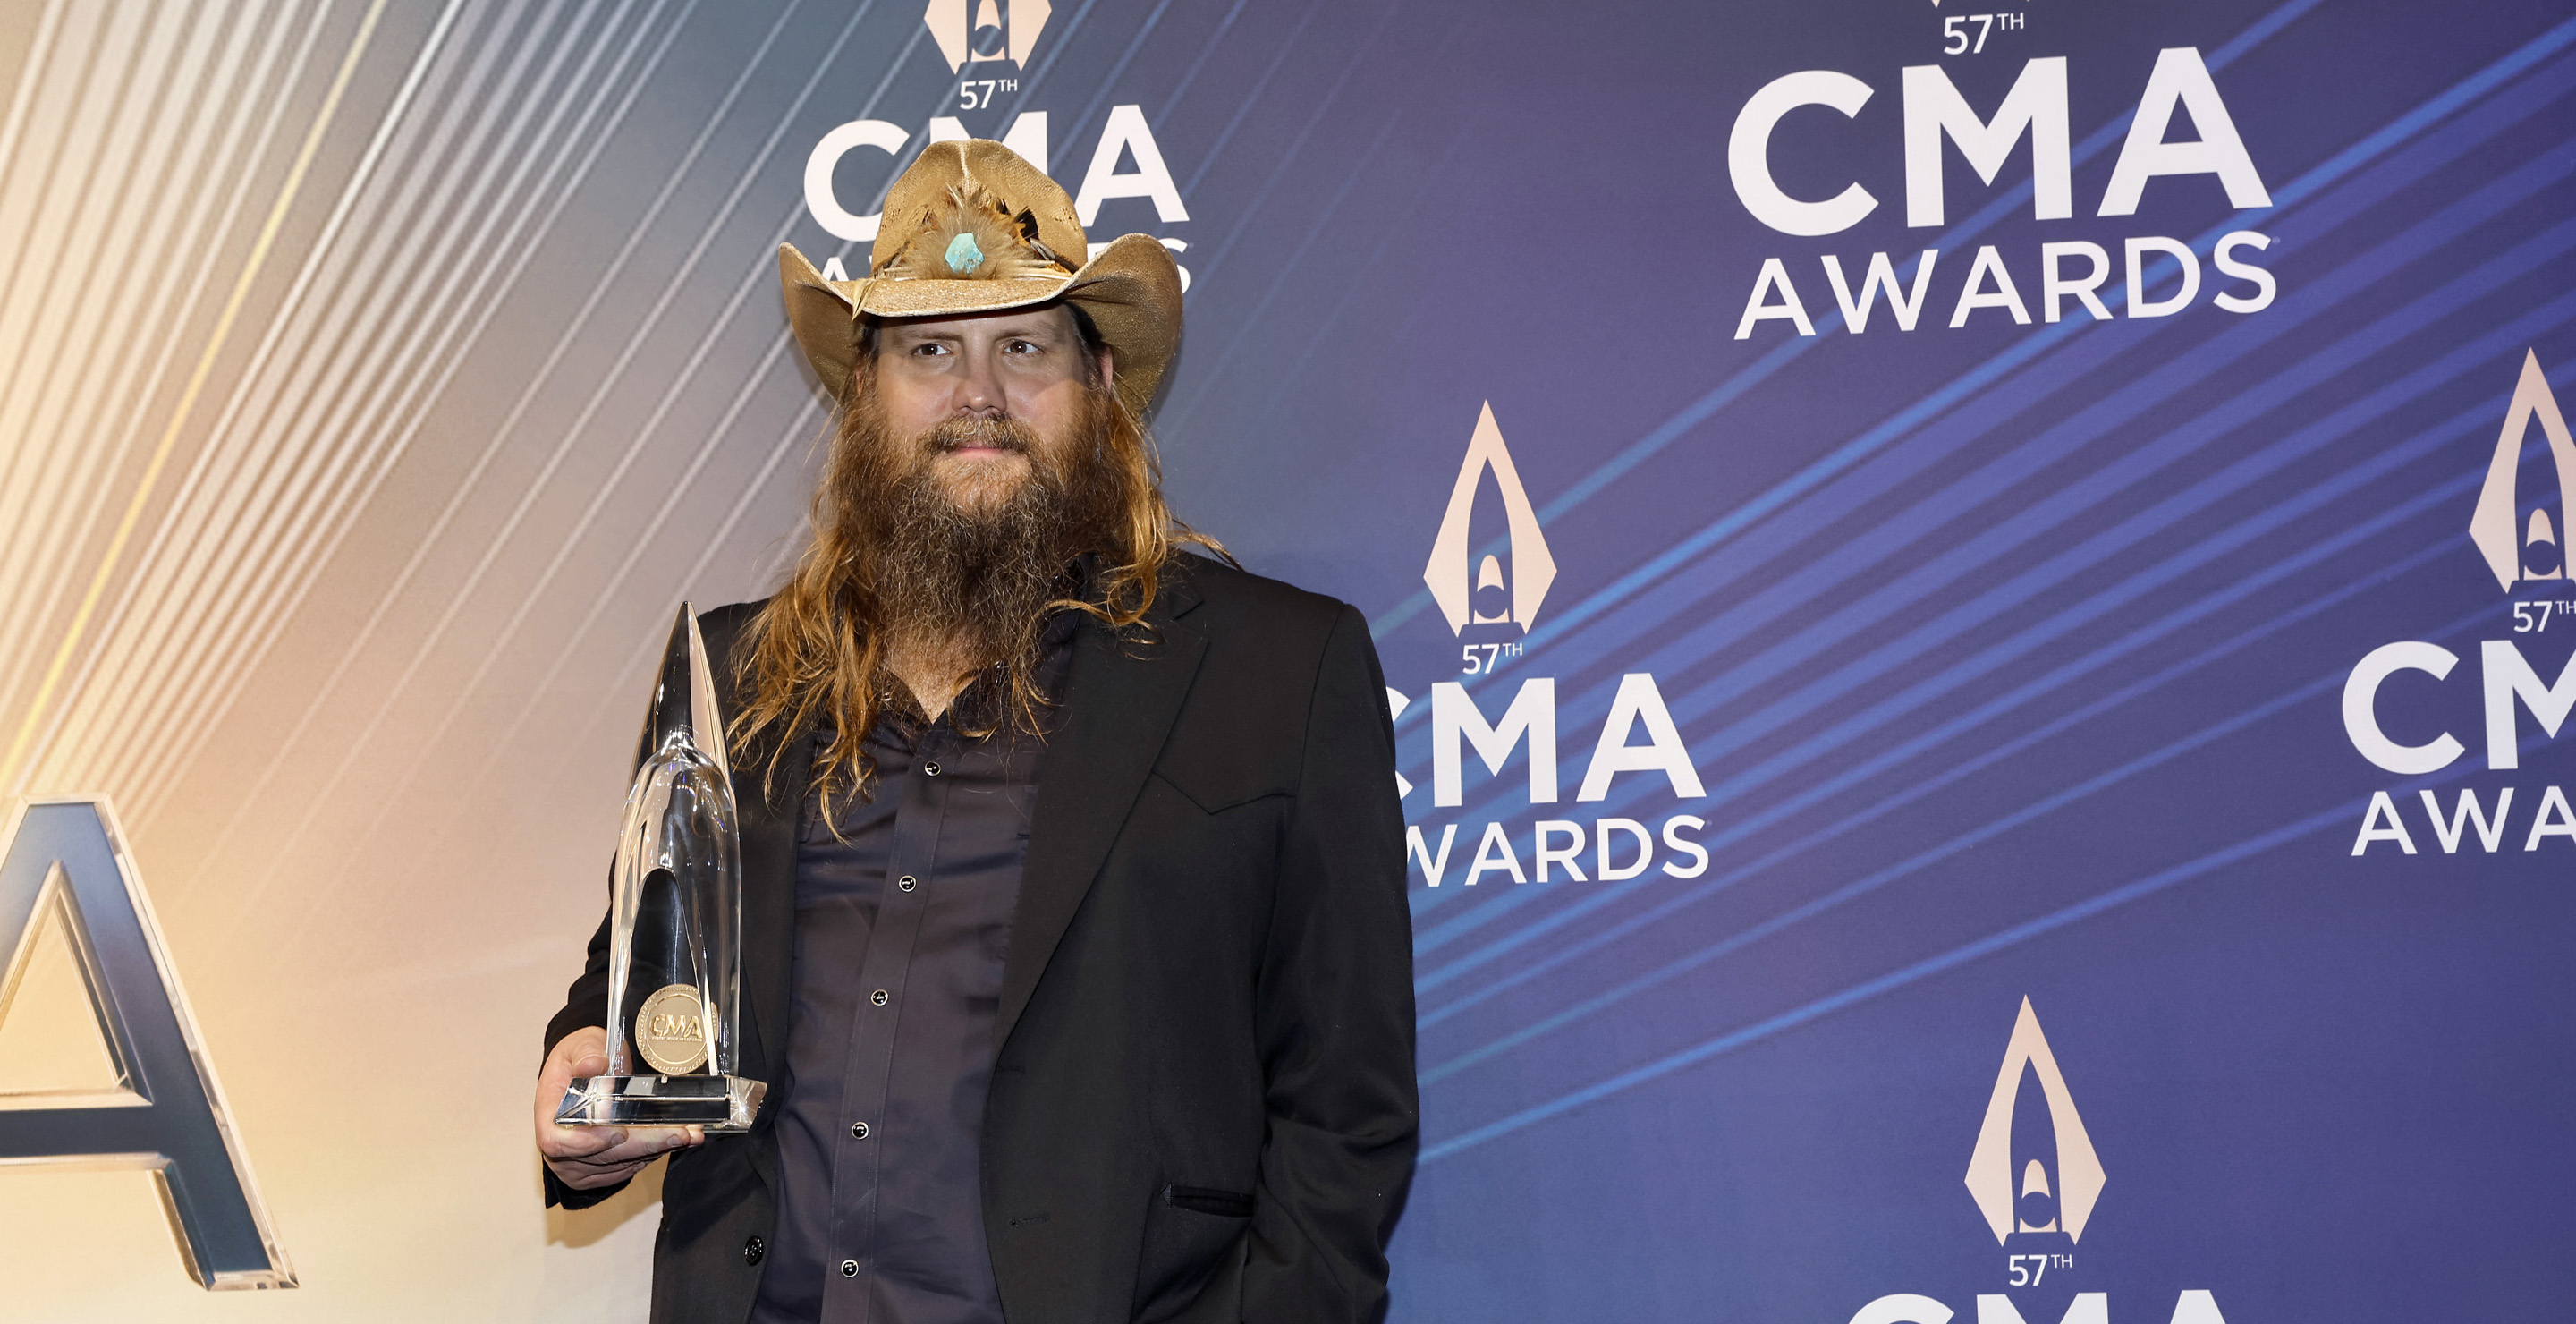 Fan Wins Tickets to See Chris Stapleton, Gets Him to Sign Diploma